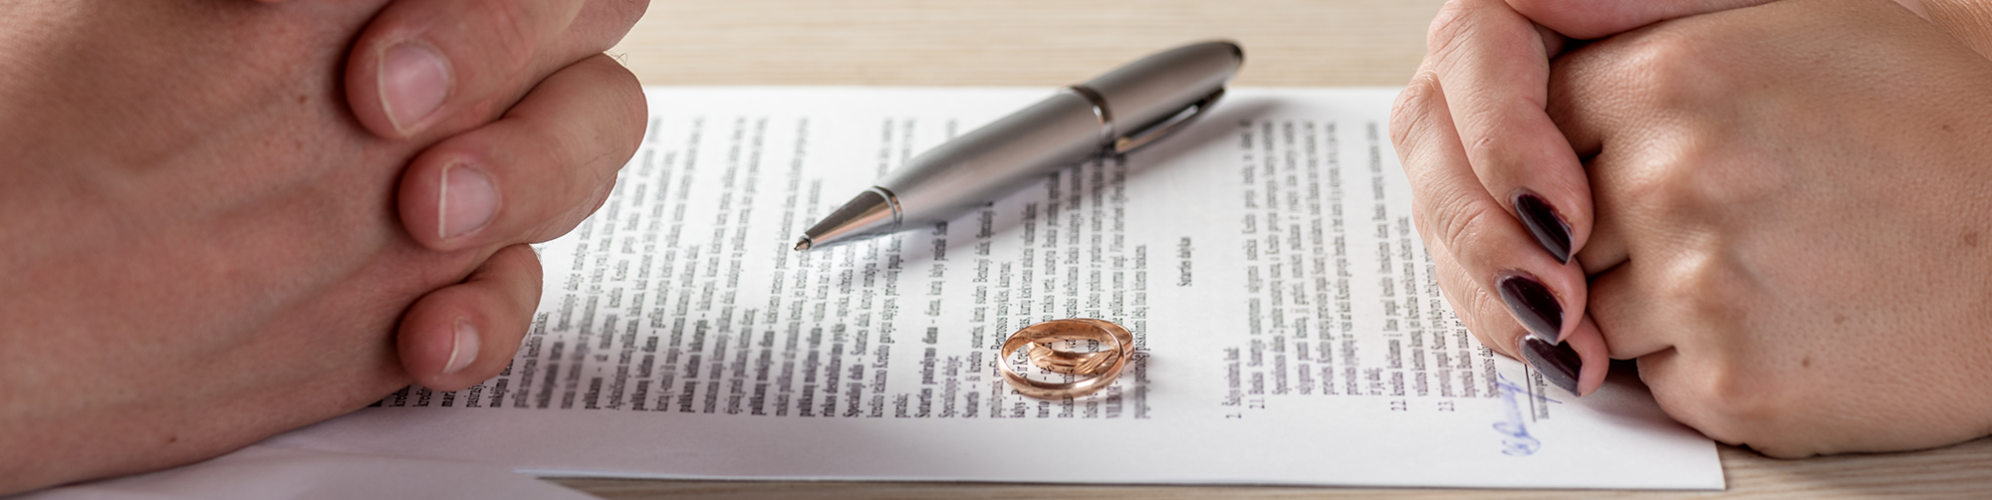 Separated couple with the wedding rings taken off, signing an agreement. SAM Conveyancing's guide to getting occupational rent